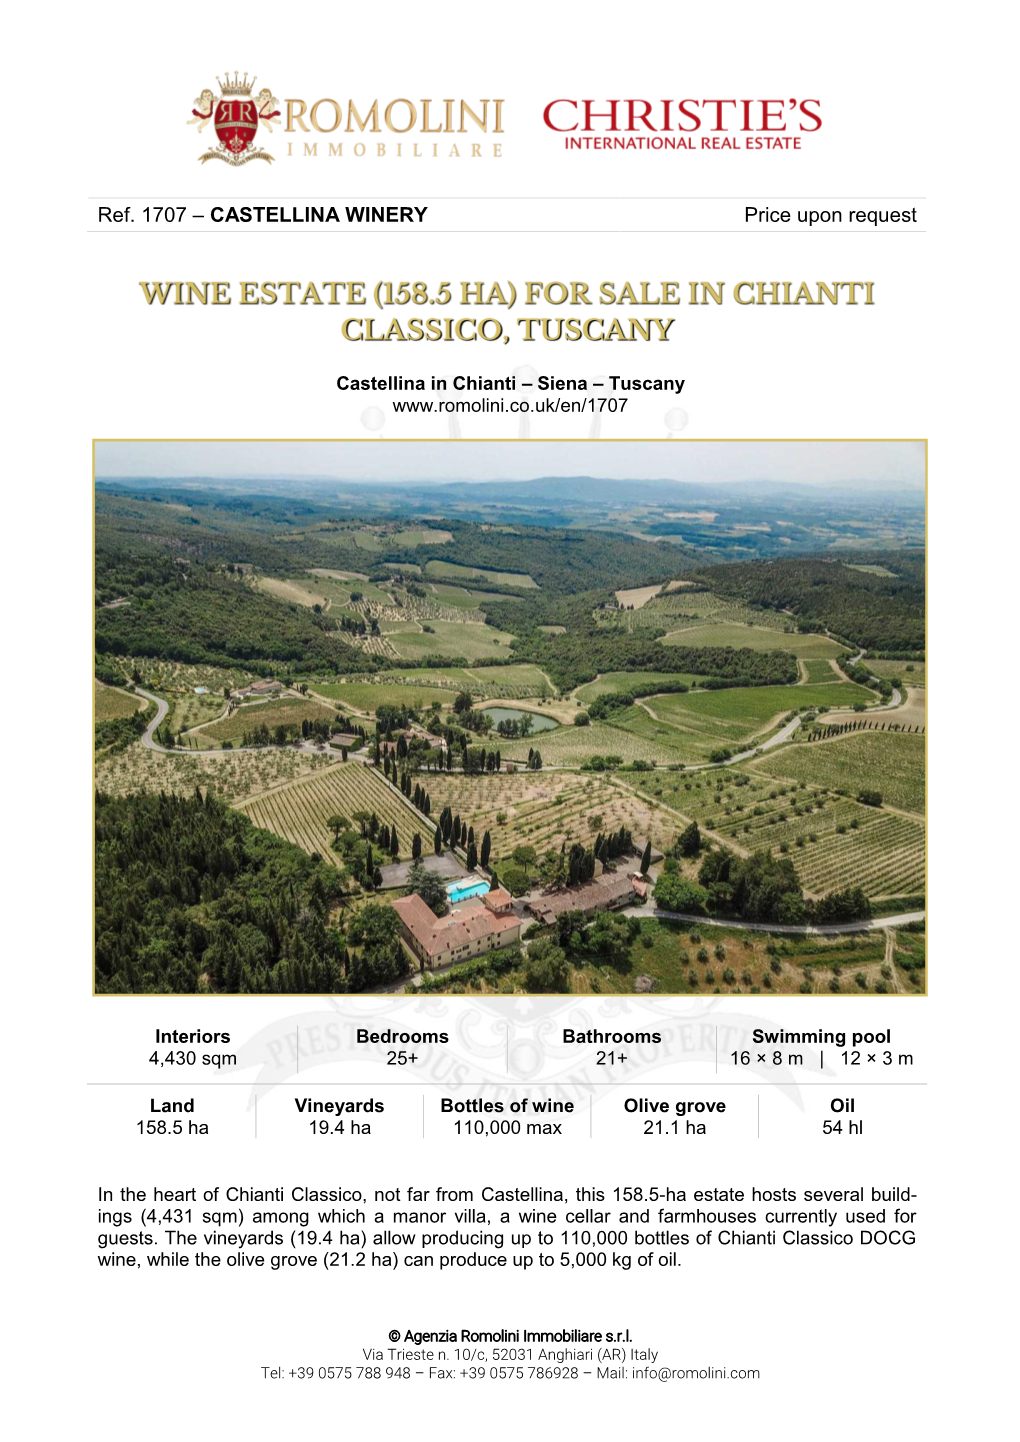 Ref. 1707 – CASTELLINA WINERY Price Upon Request